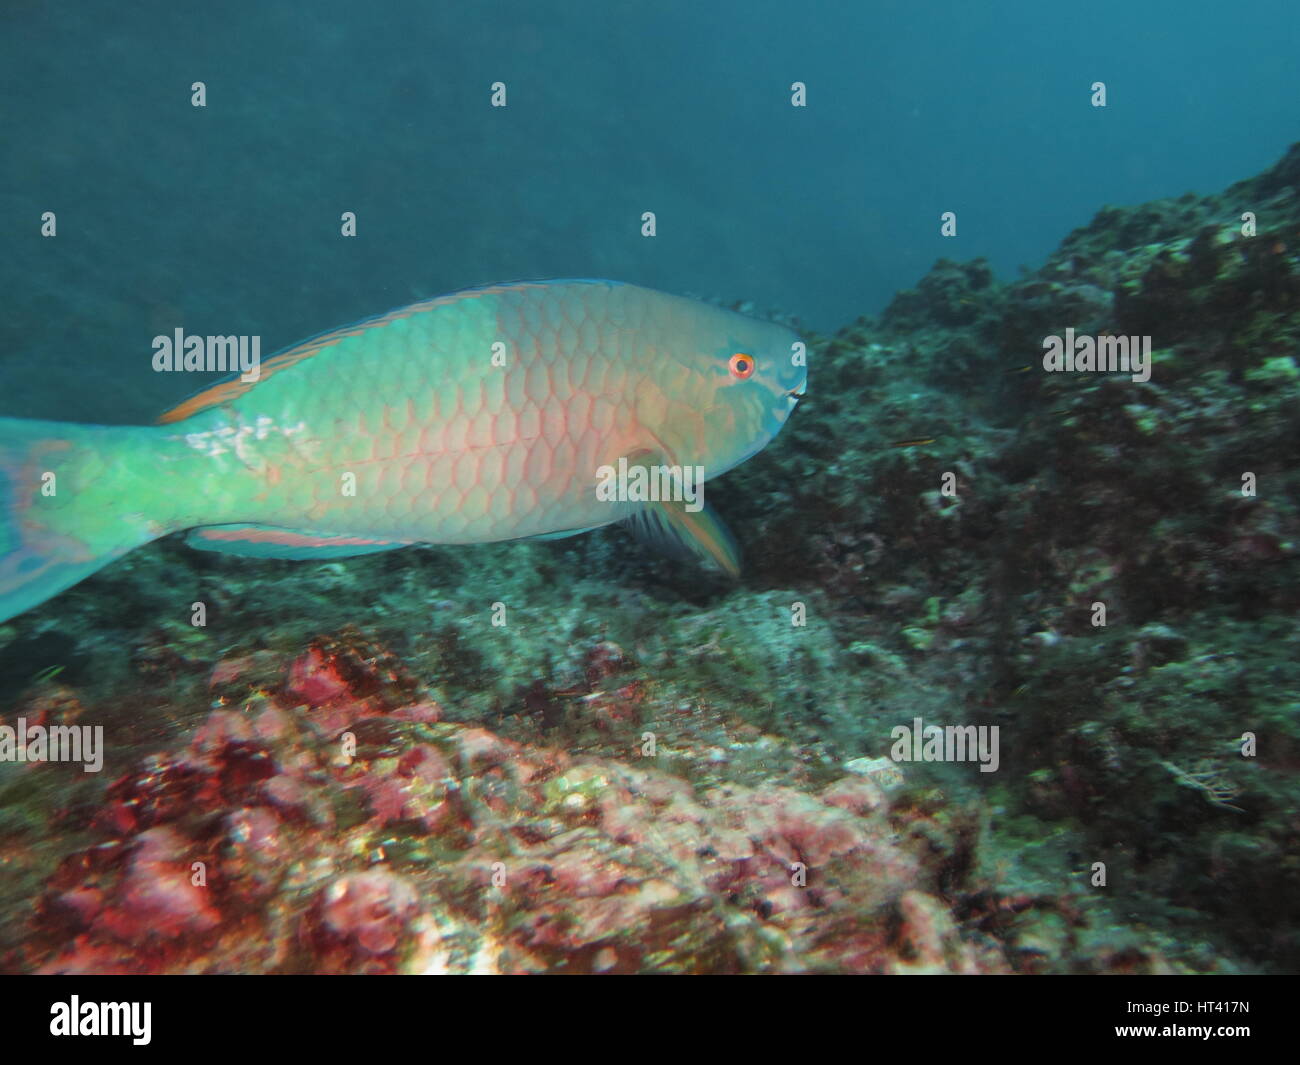 Male ember parrotfish (Scarus rubroviolaceus) swimming over rocks at Cocos island Stock Photo